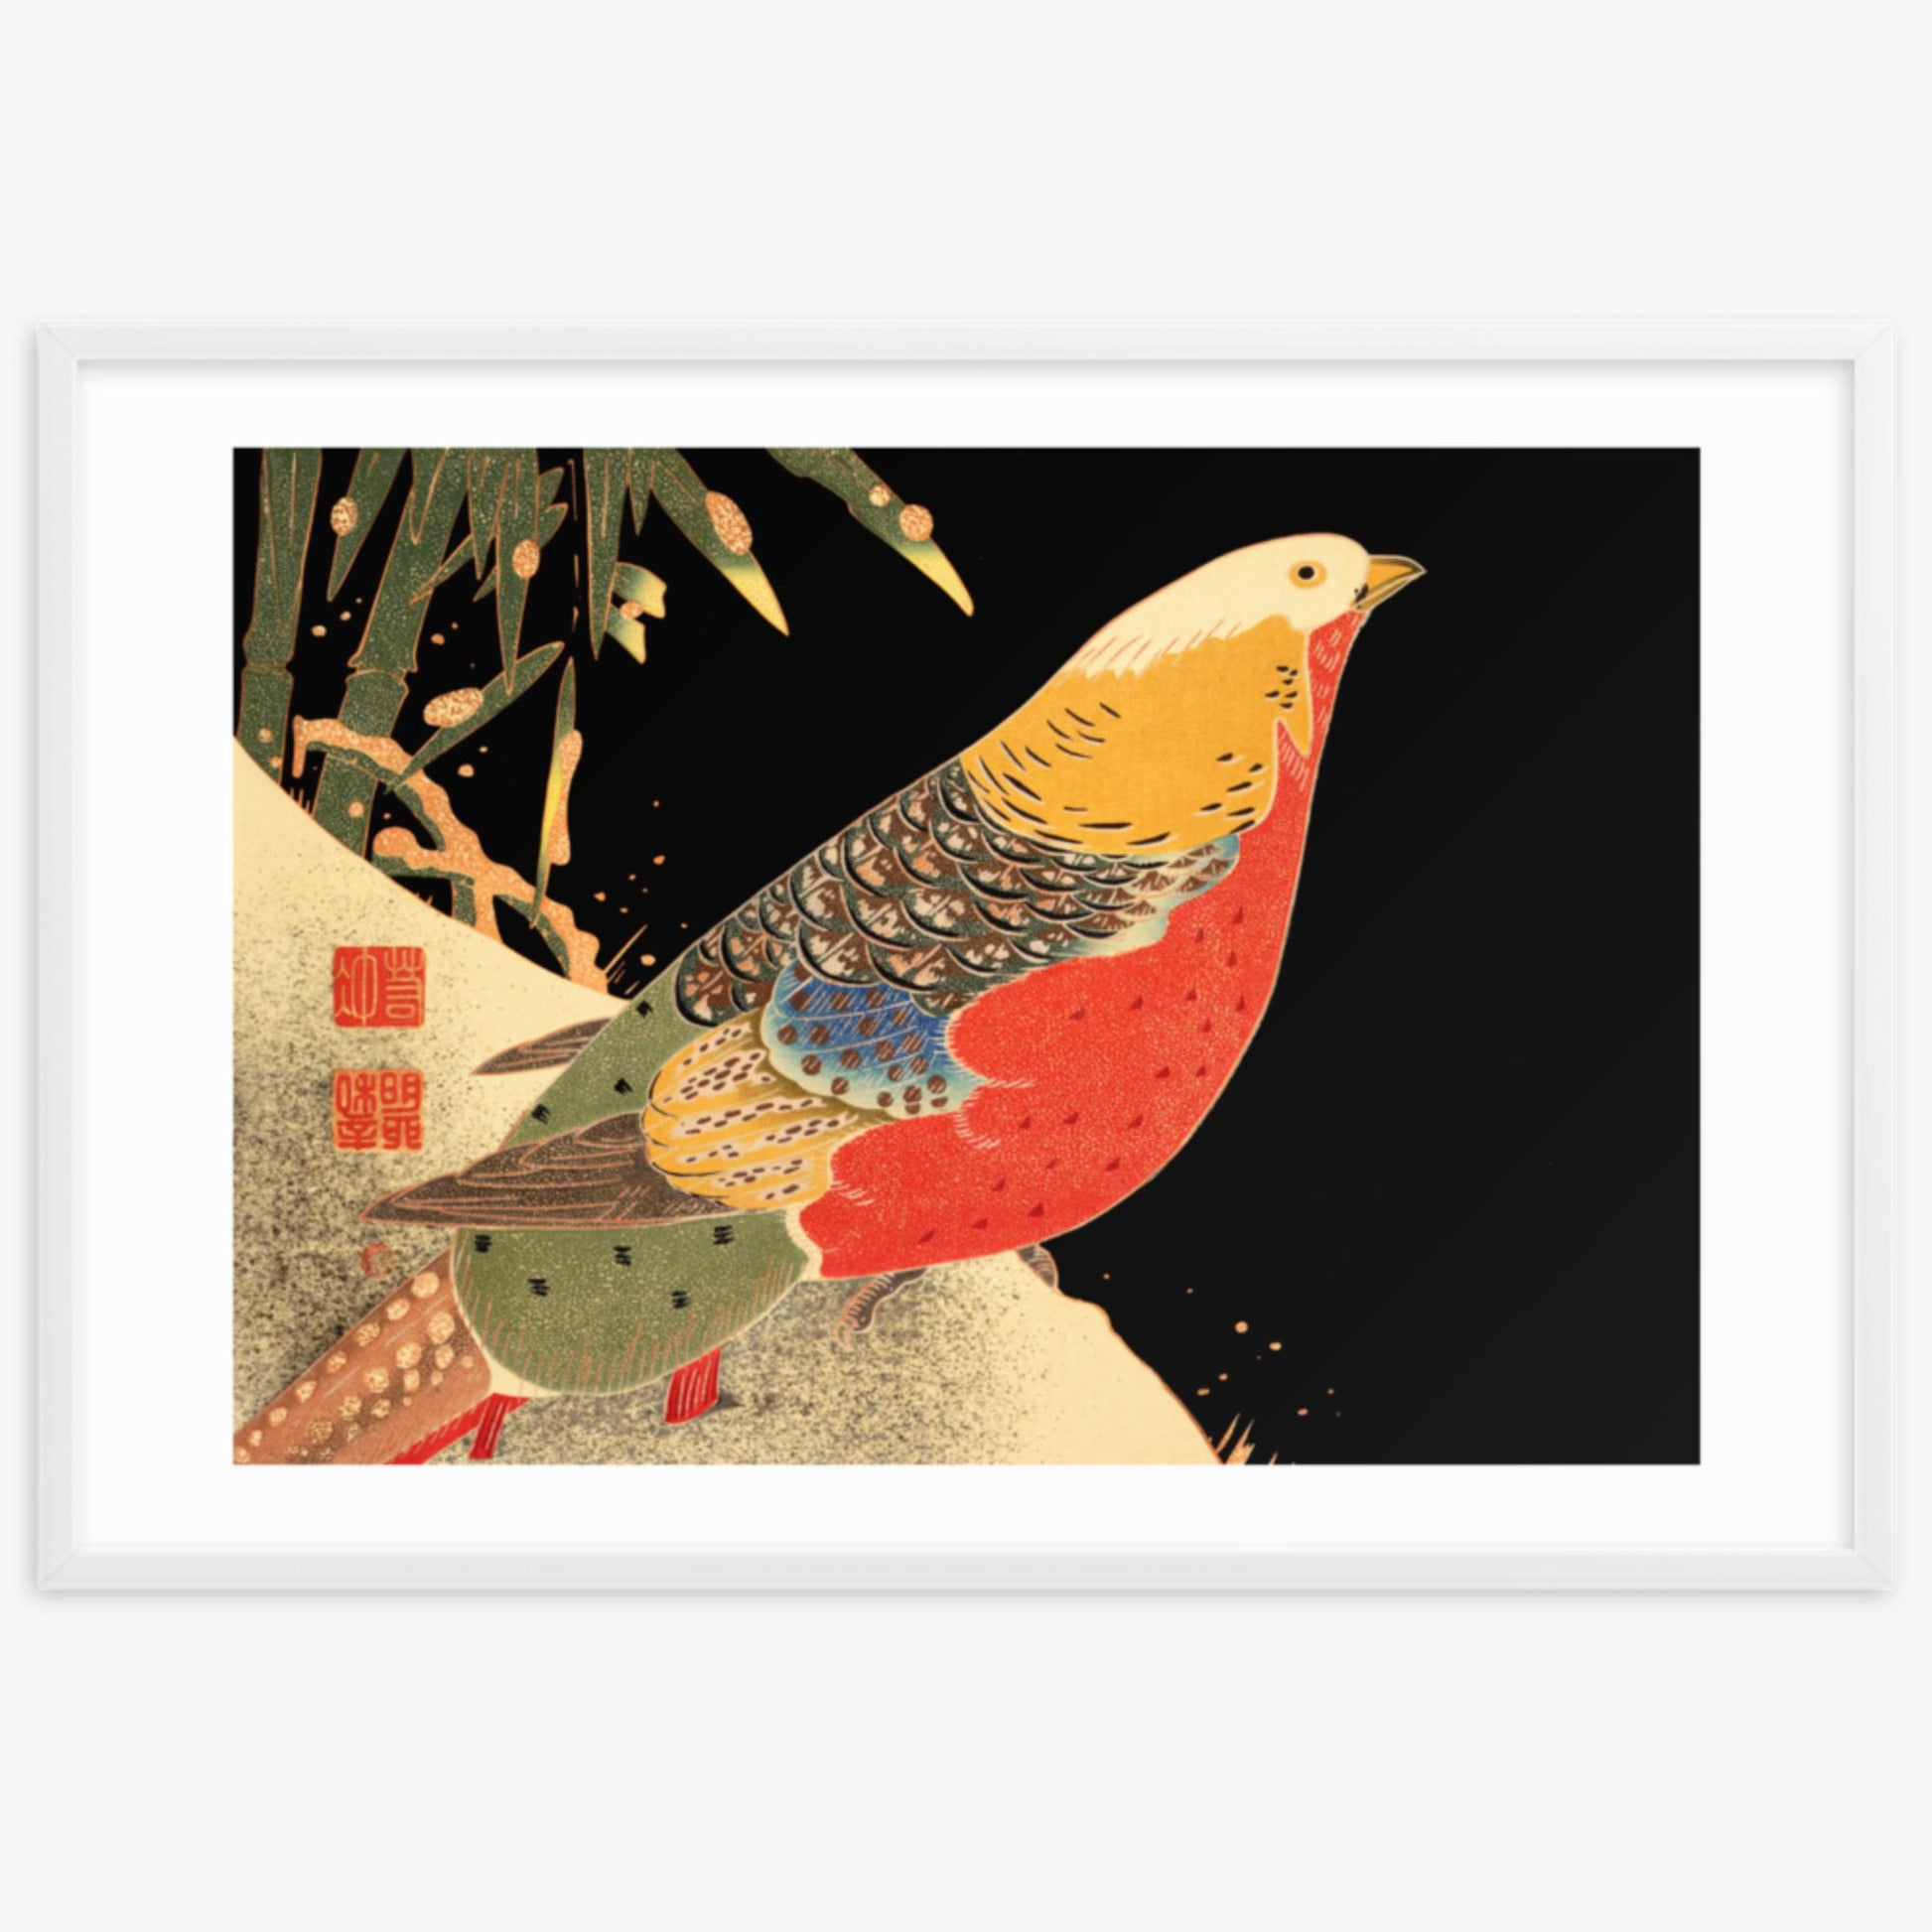 Ito Jakuchu - Golden Pheasant in the Snow 61x91 cm Poster With White Frame